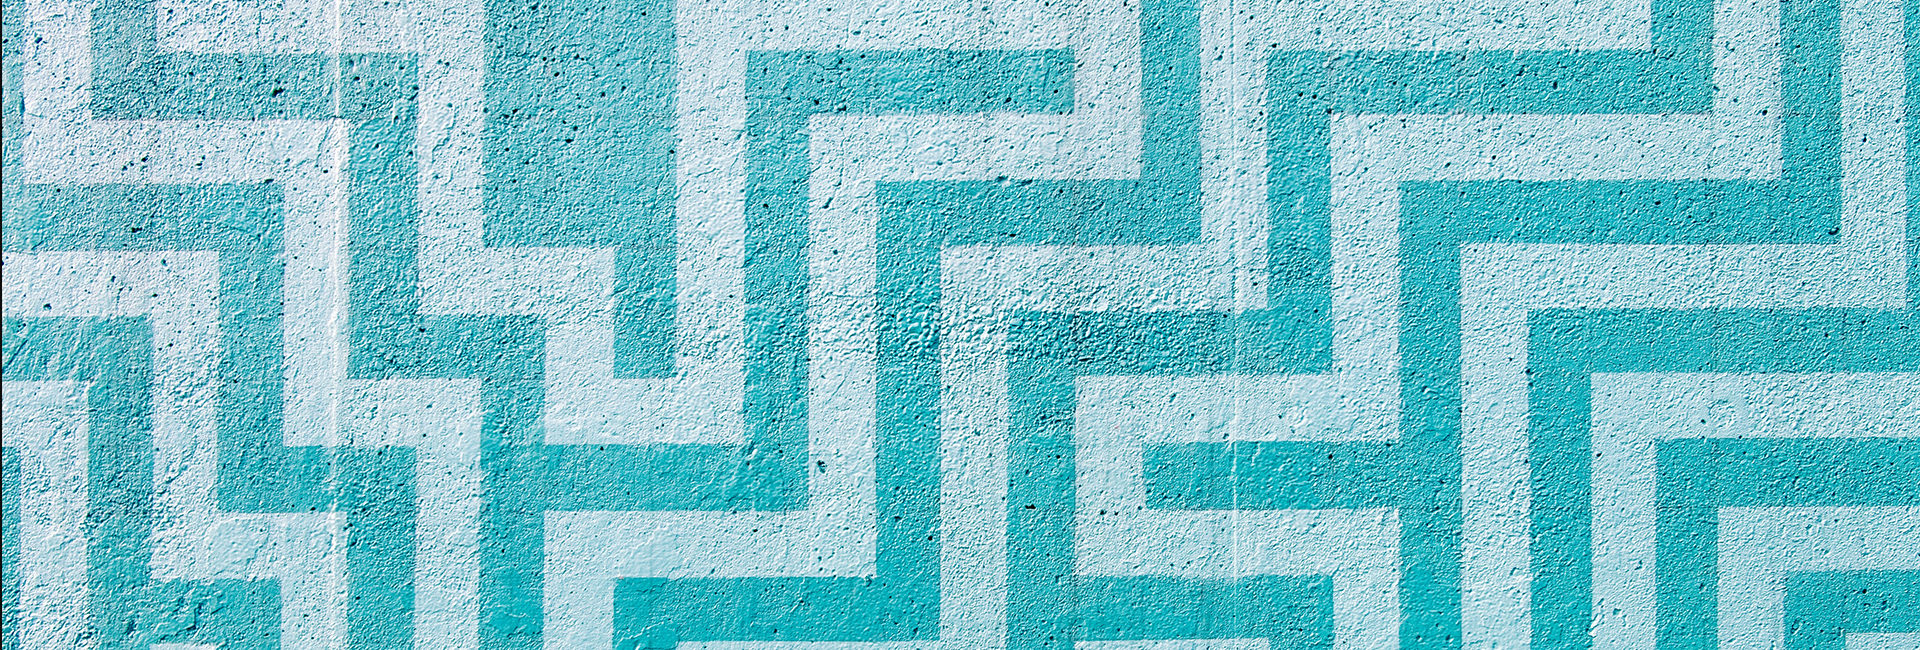 teal-labryrinth-painted-on-concrete